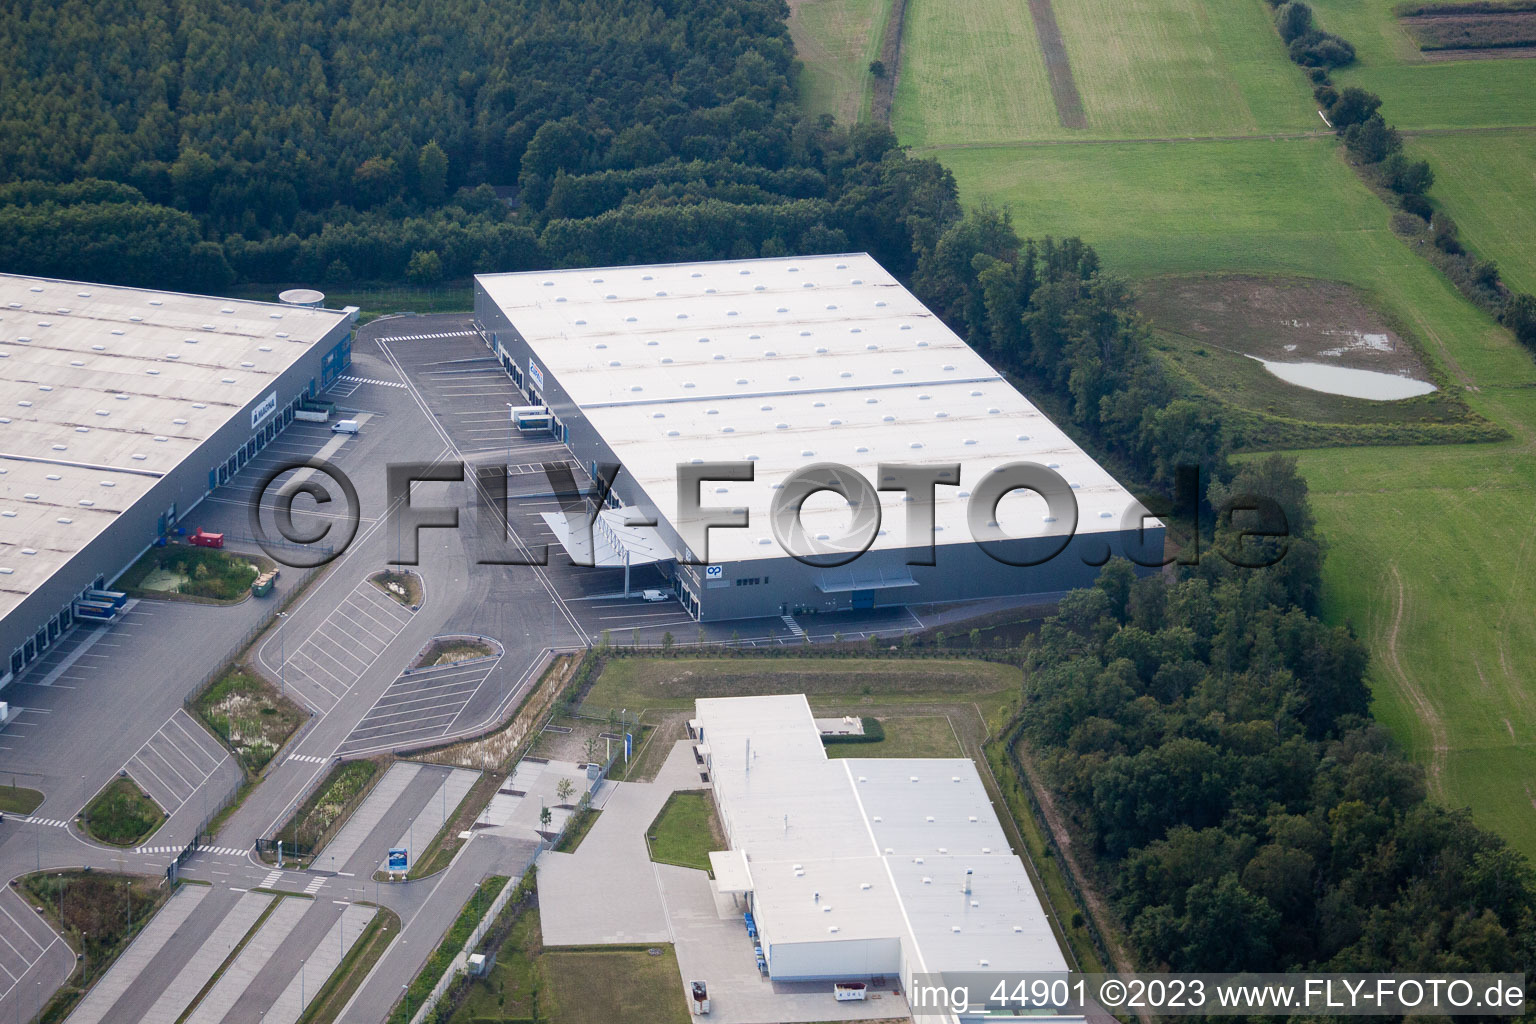 Oblique view of Horst industrial area in the district Minderslachen in Kandel in the state Rhineland-Palatinate, Germany